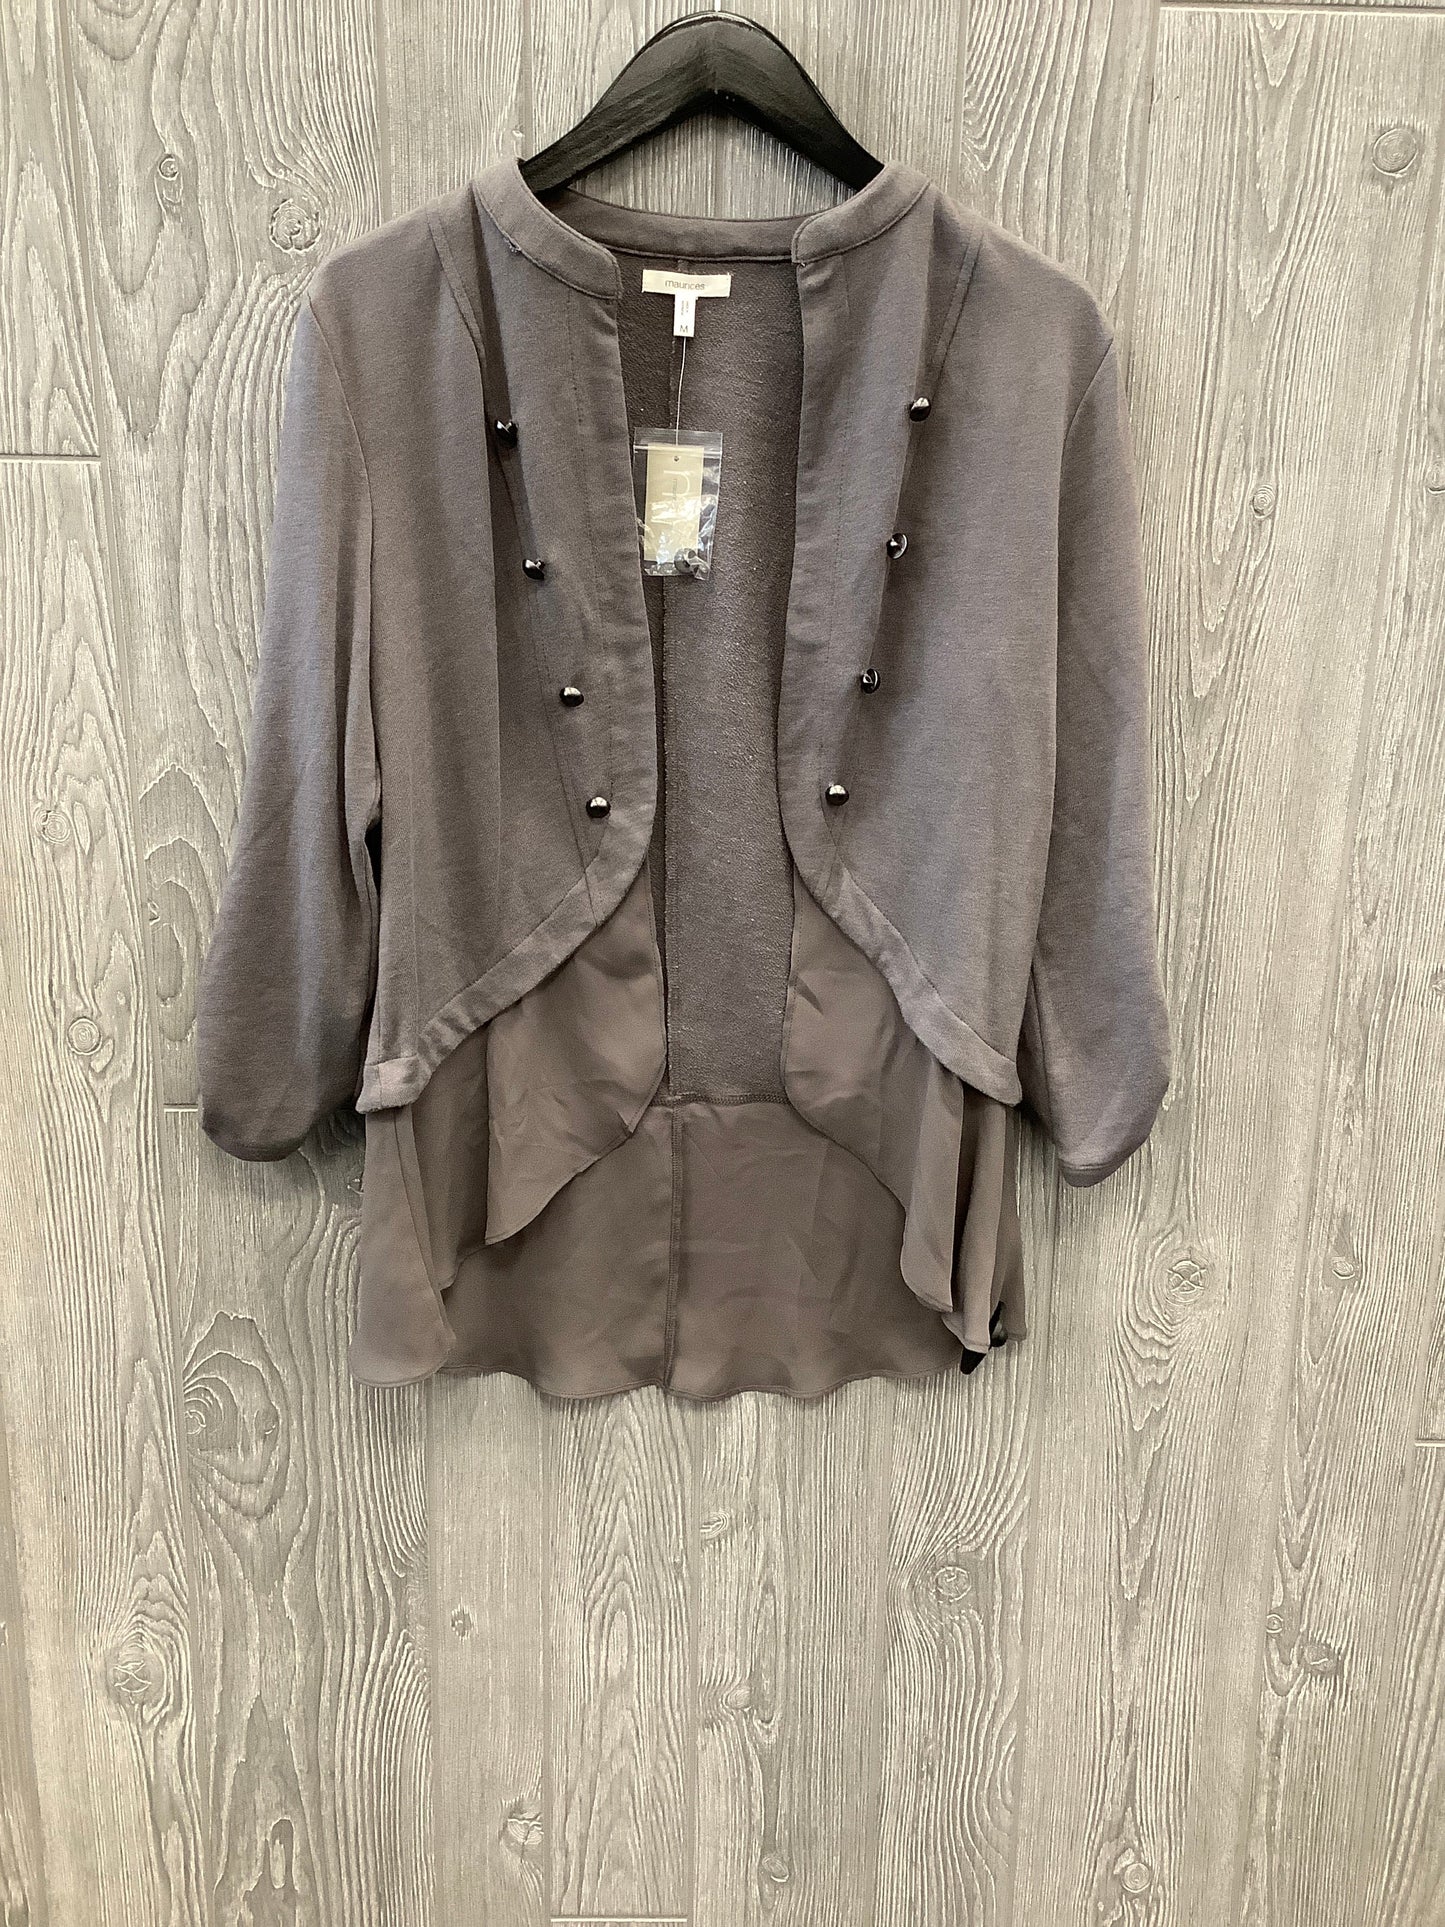 Cardigan By Maurices  Size: M